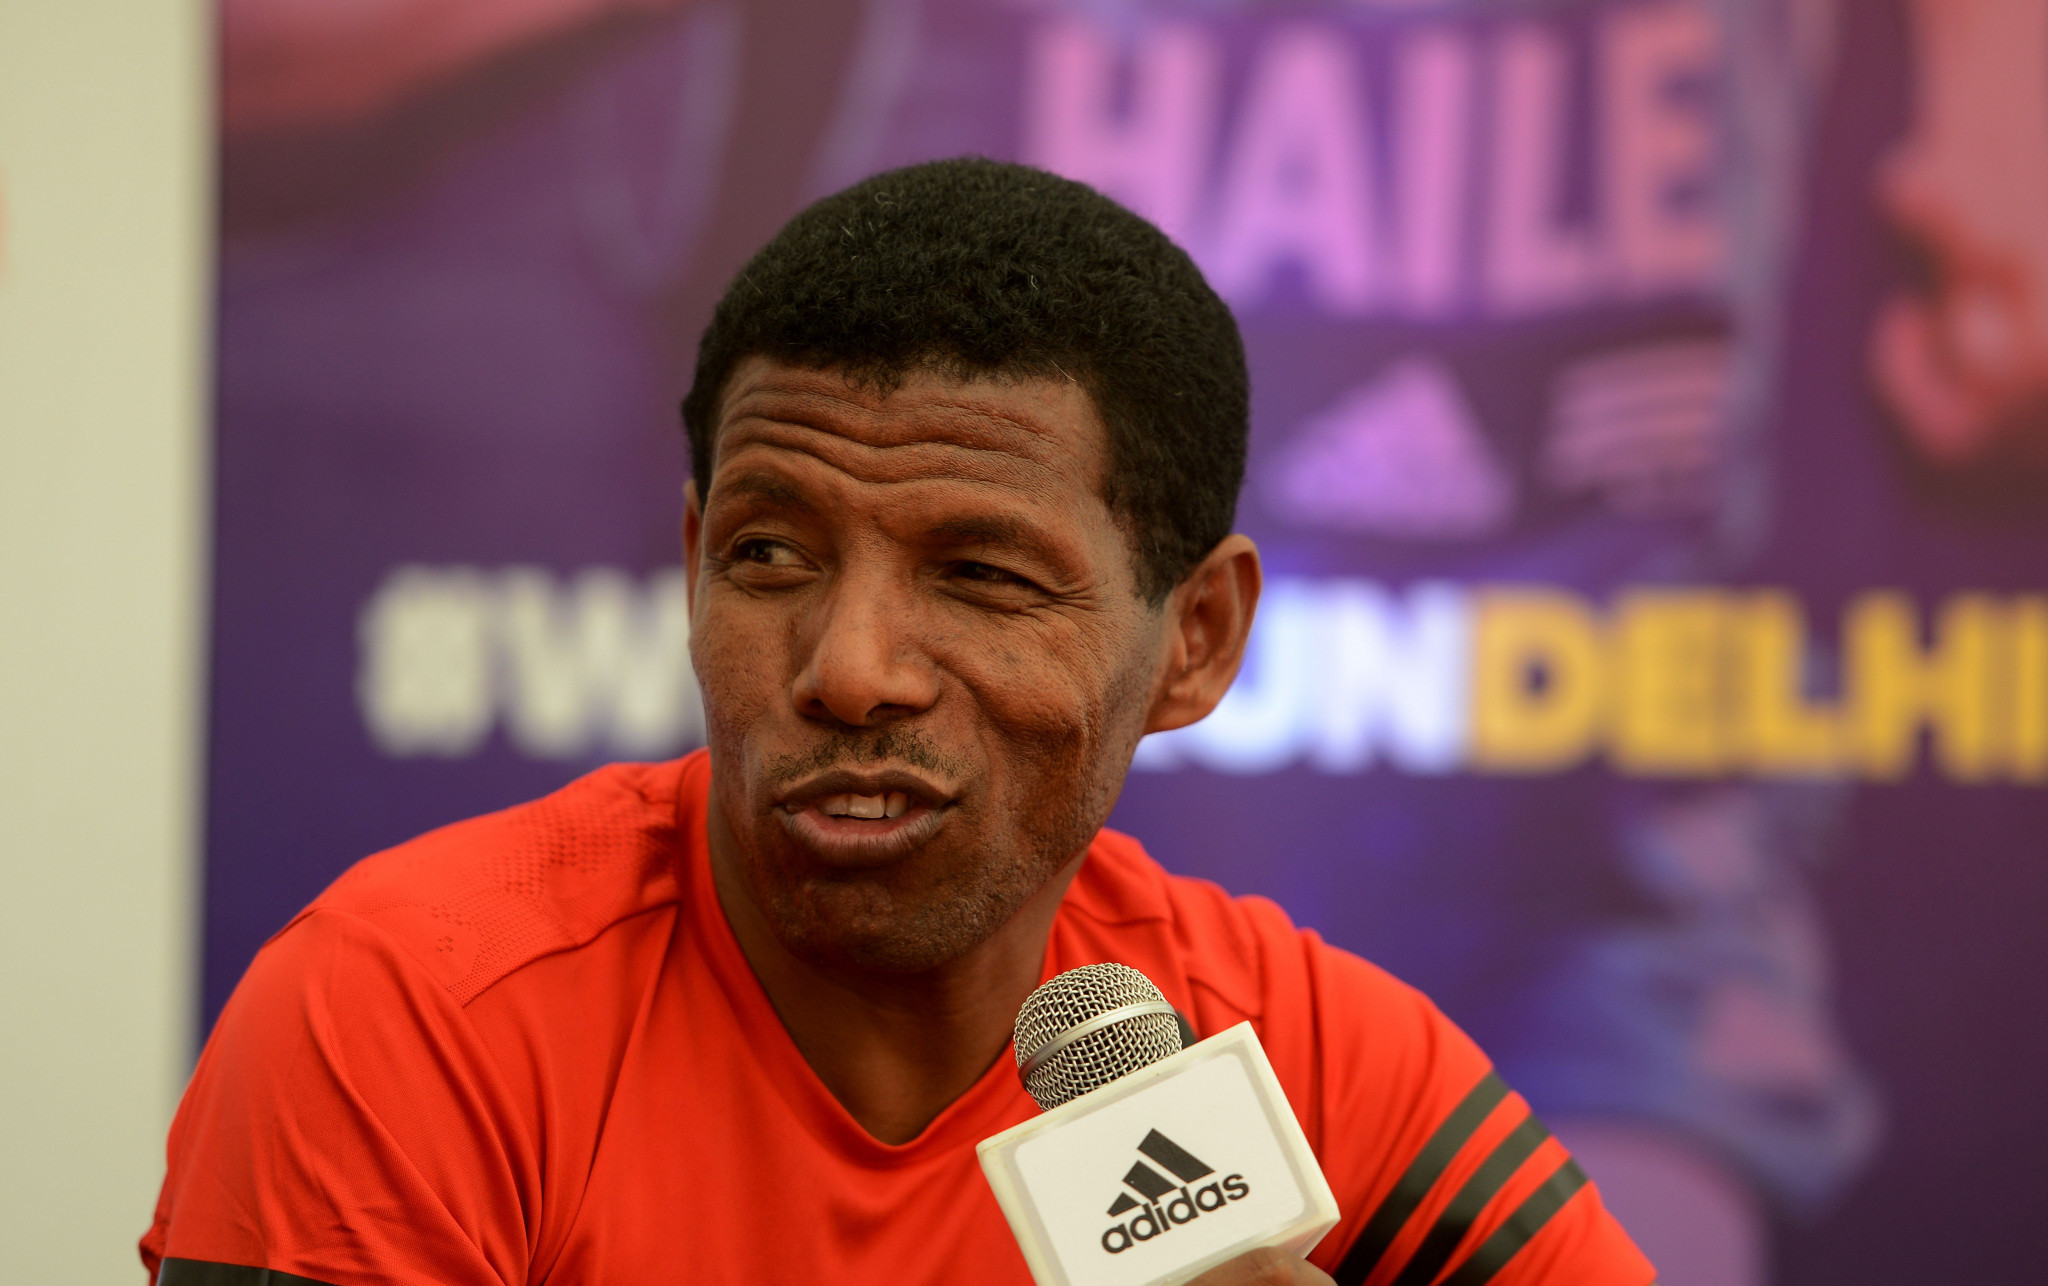 Gebrselassie insists resignation as President of Ethiopian Athletics Federation was a personal decision